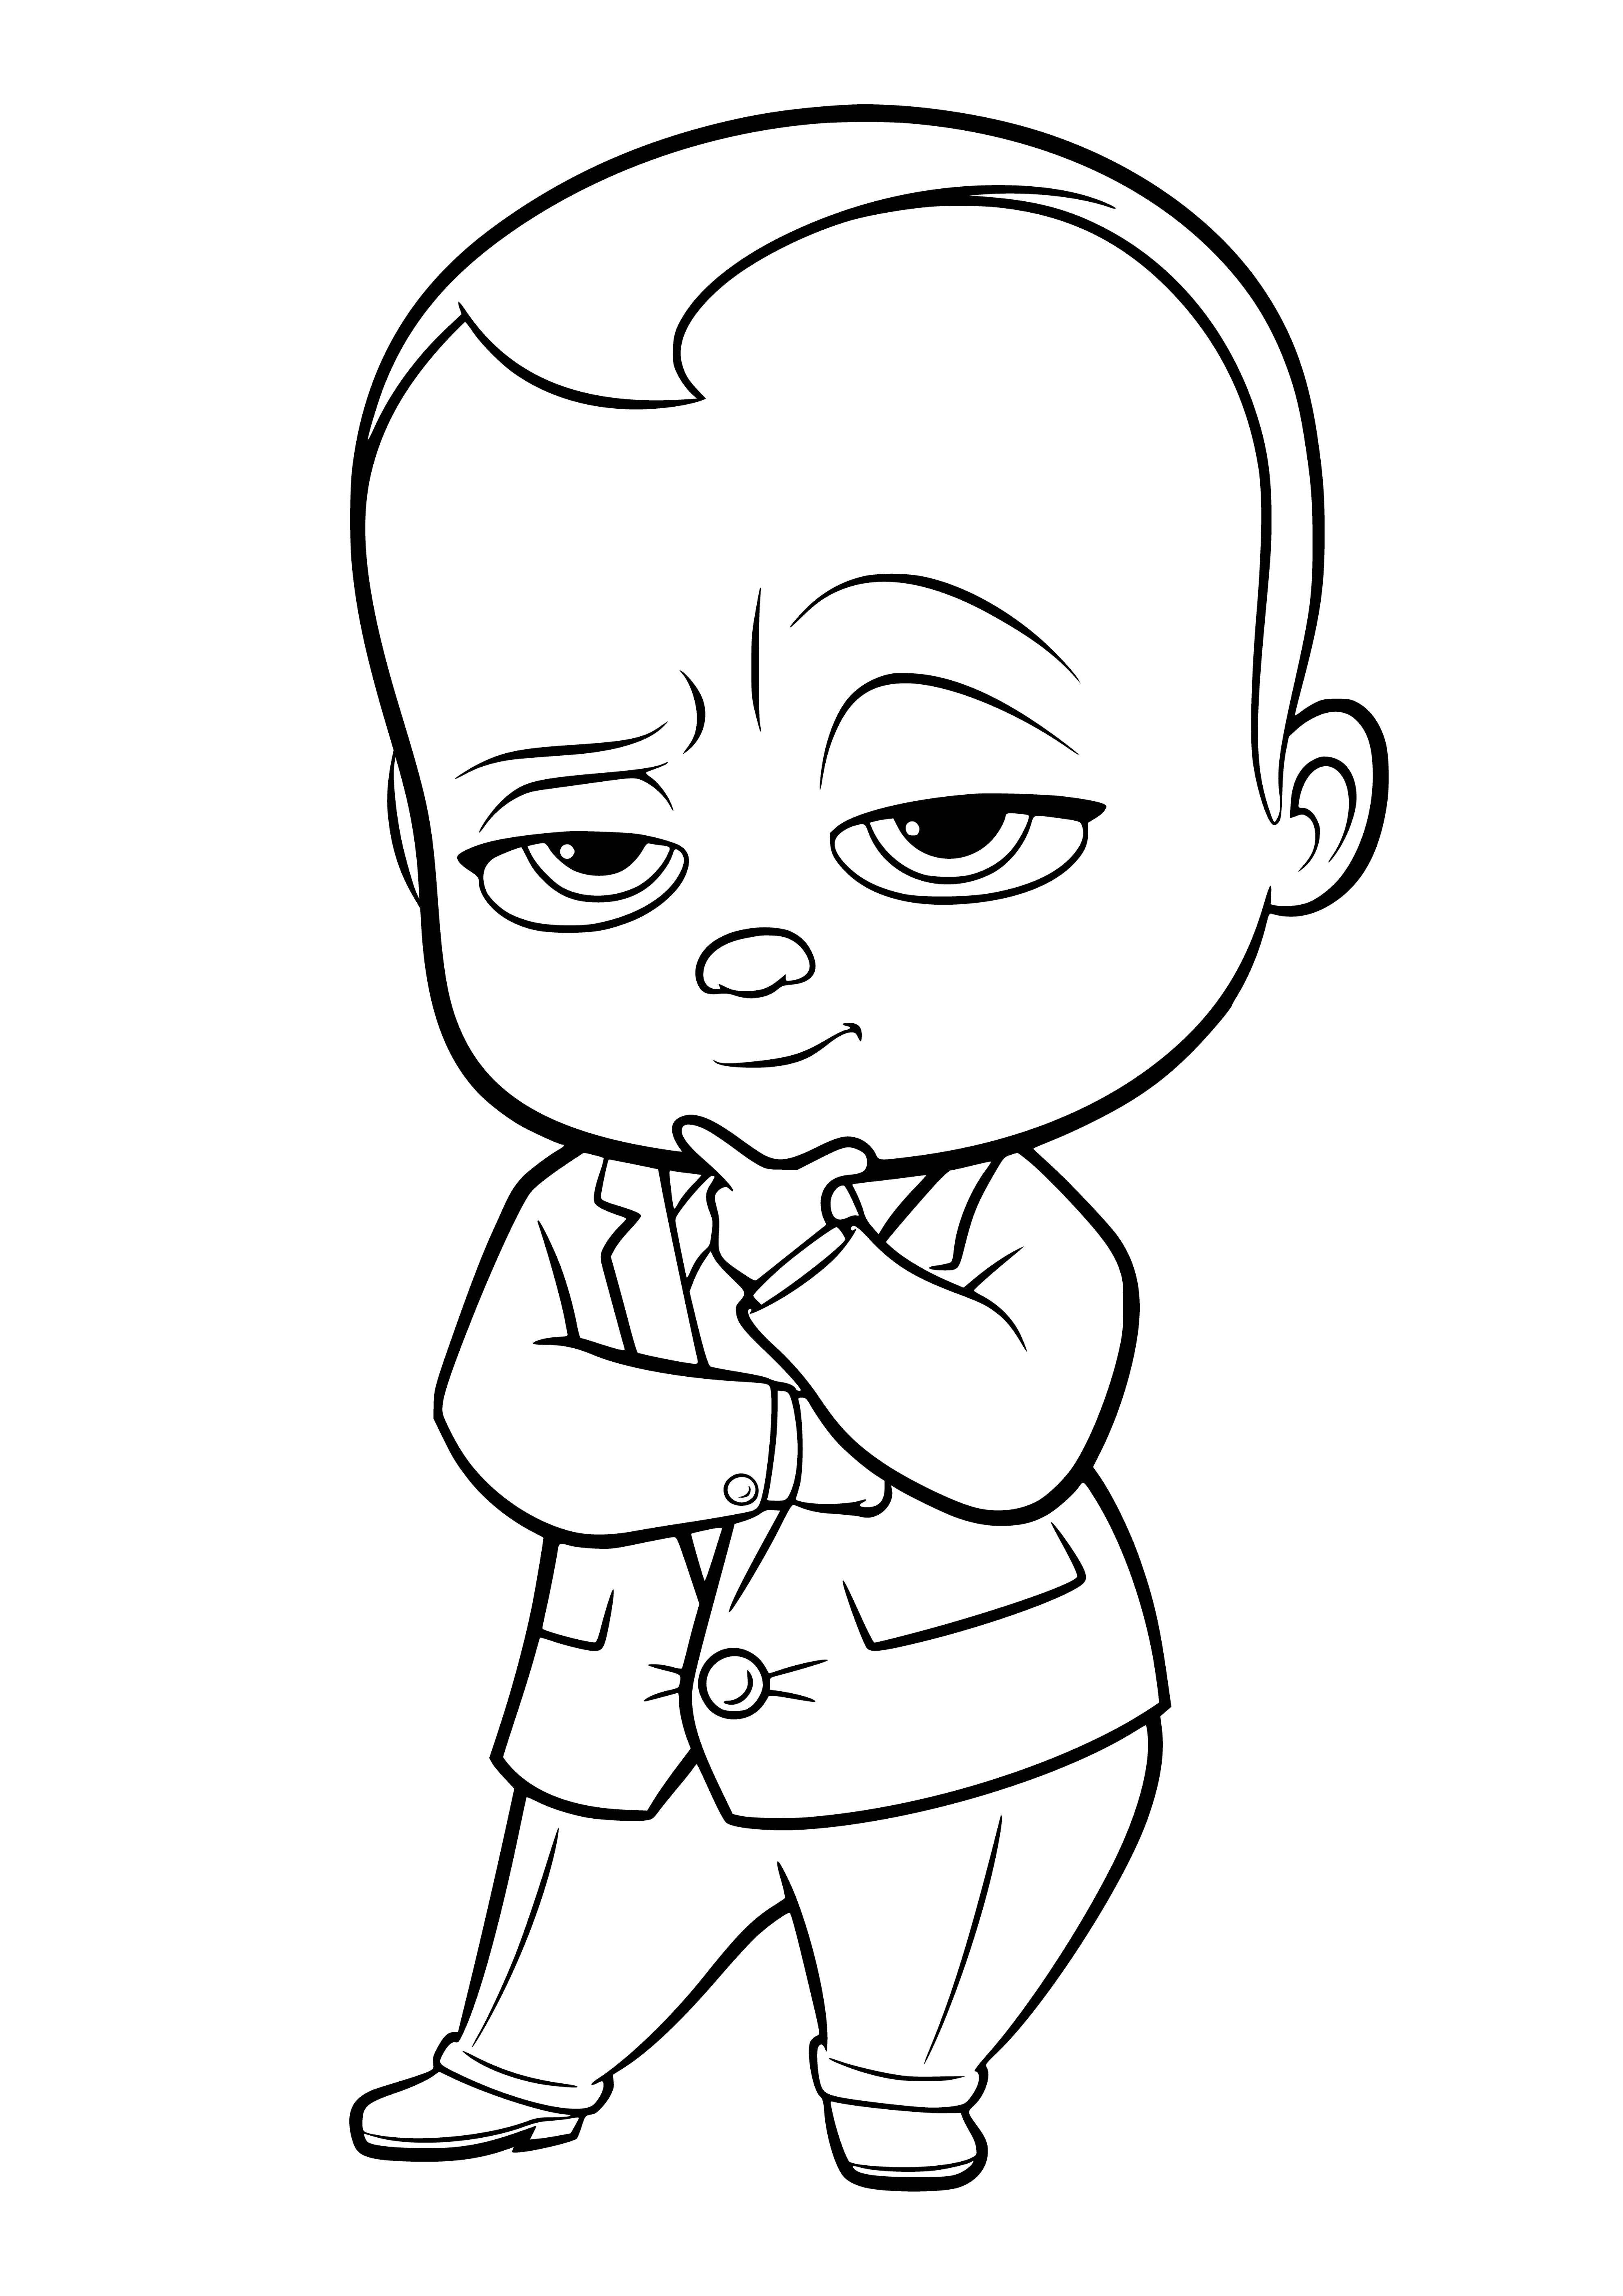 coloring page: Baby in black suit, holding black lollipop, wearing sunglasses, beard and mustache. Eyes closed, feet on chair arm.